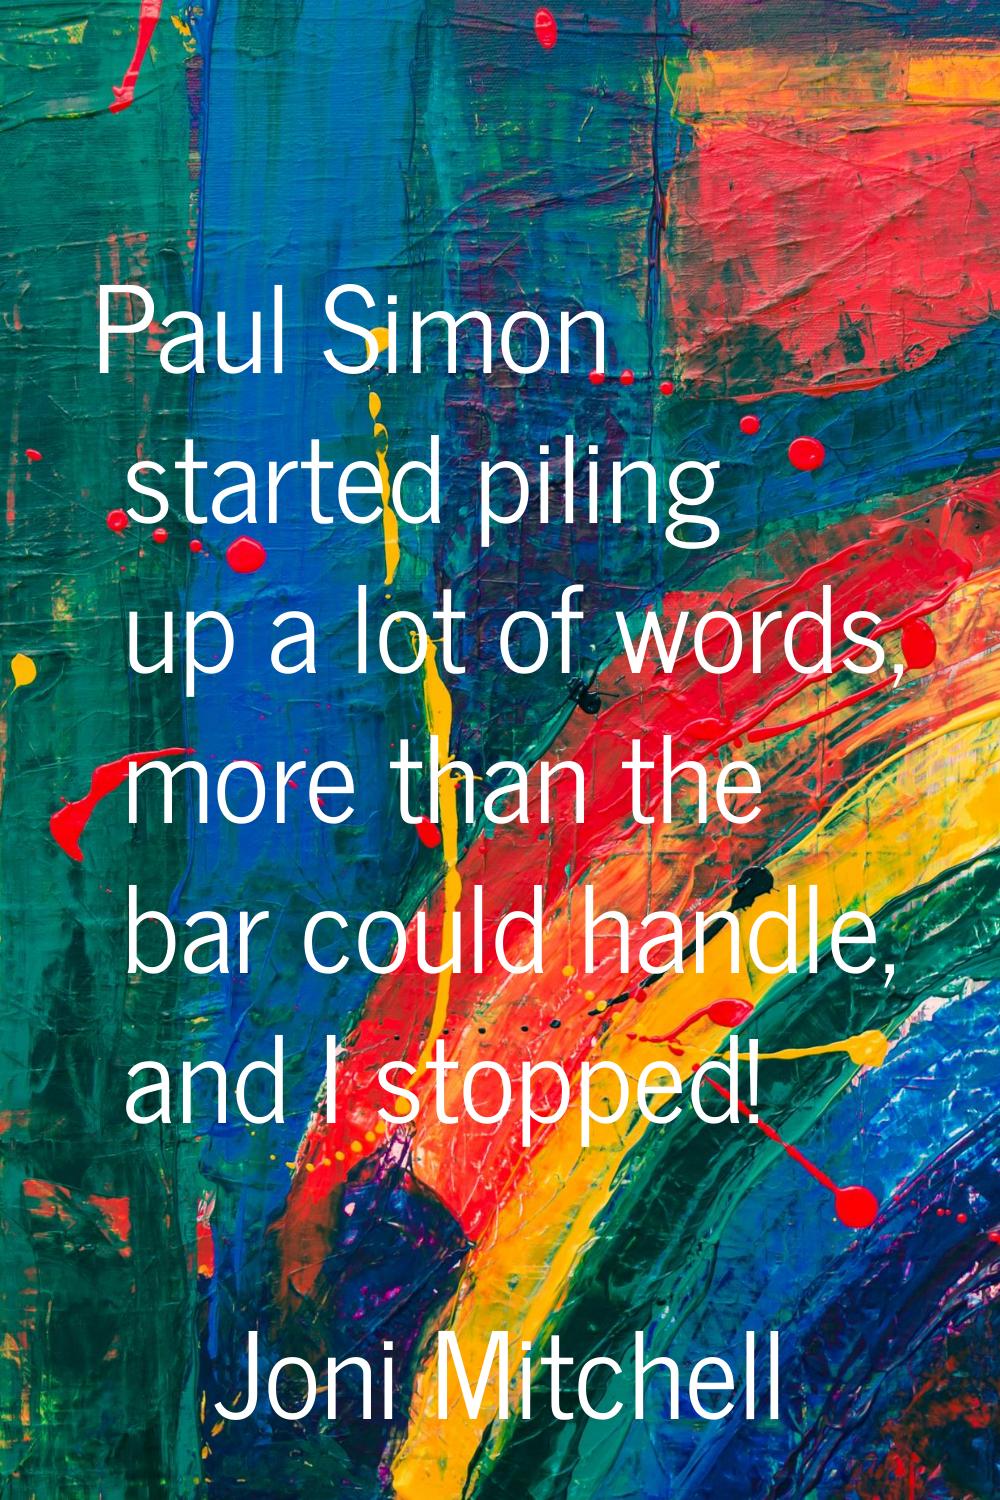 Paul Simon started piling up a lot of words, more than the bar could handle, and I stopped!